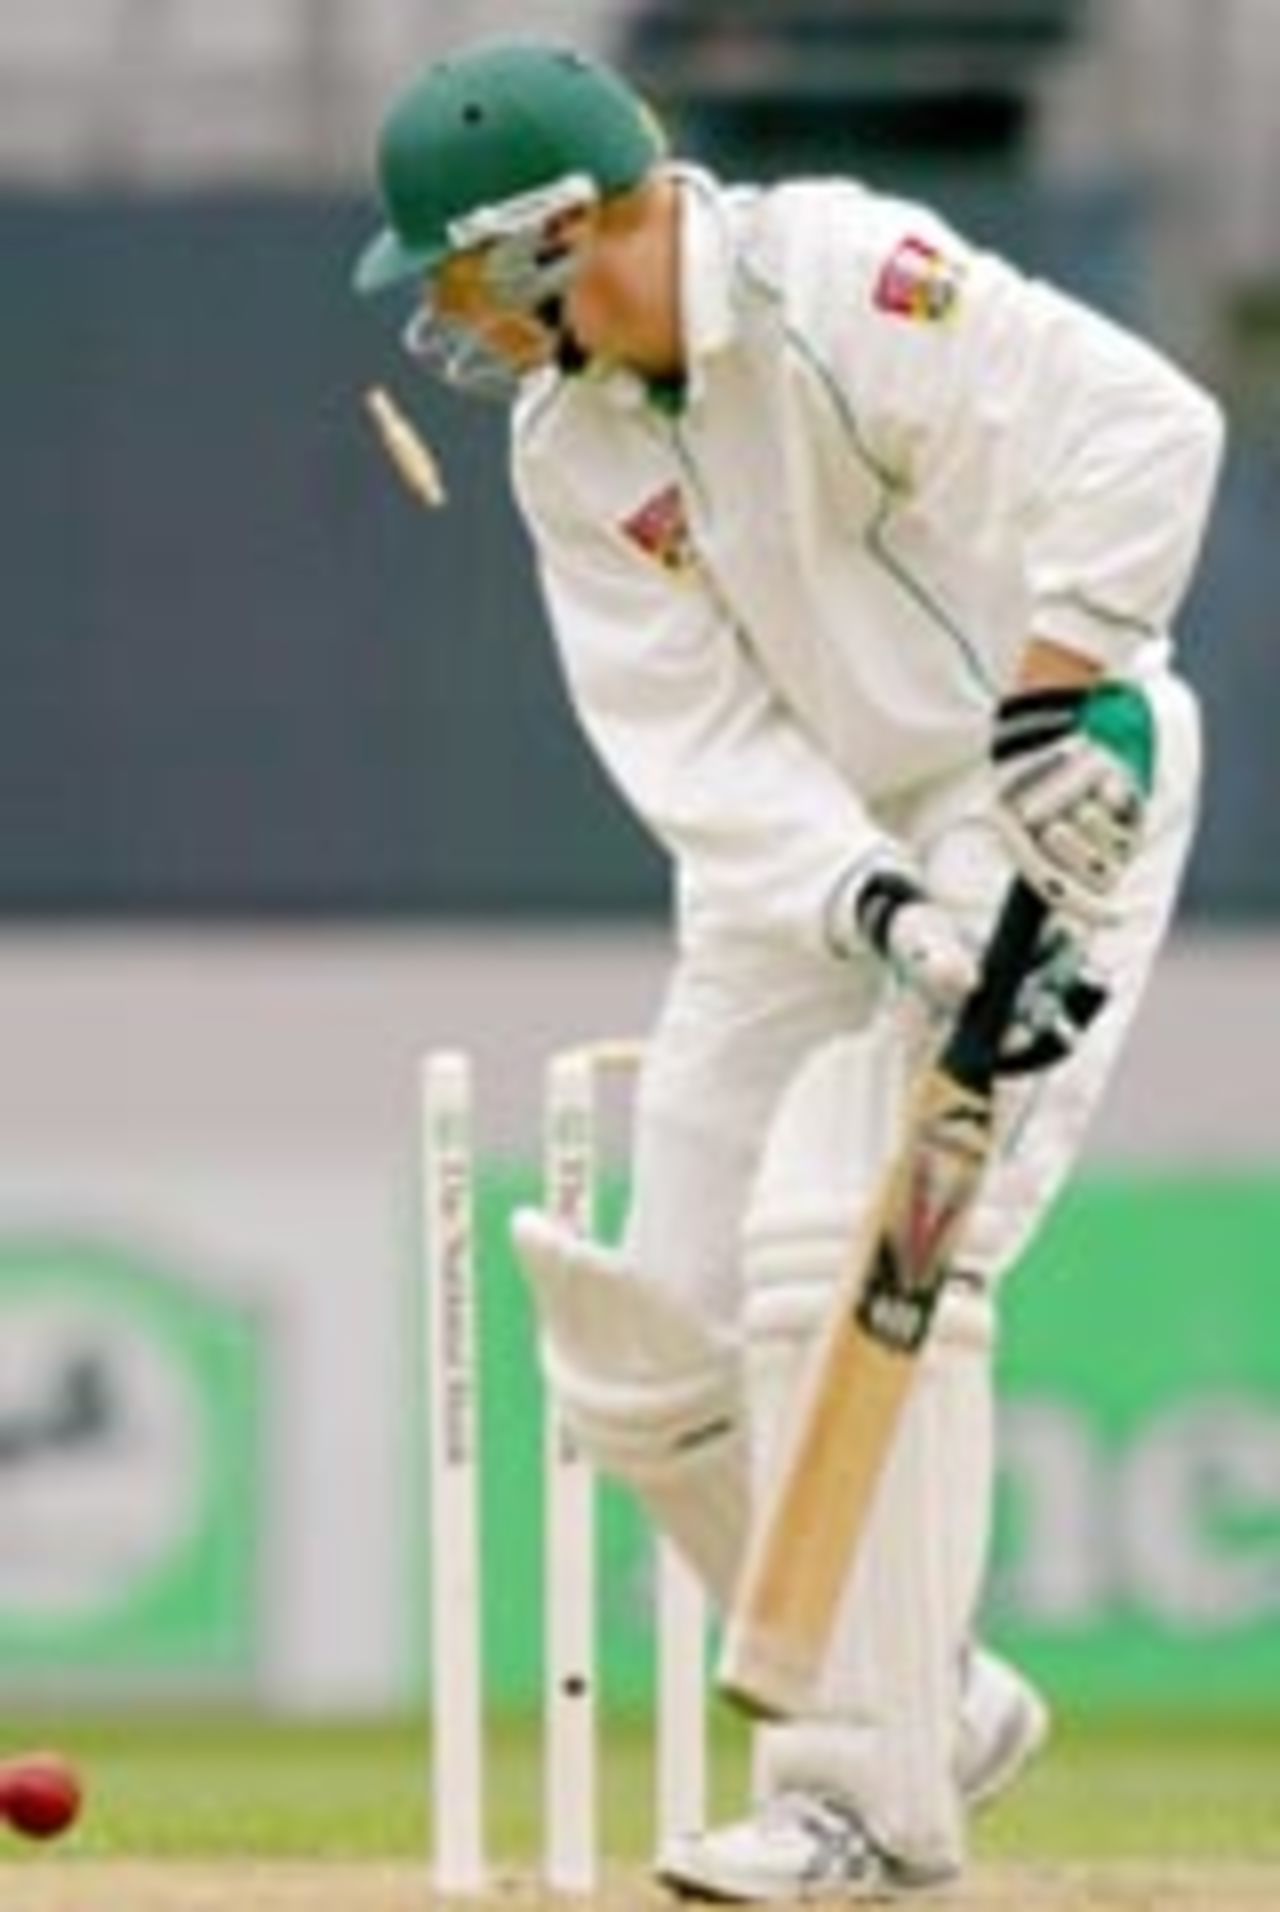 Chris Martin bowled, New Zealand v South Africa, 2nd Test, Auckland, 2nd day, March 19th, 2004